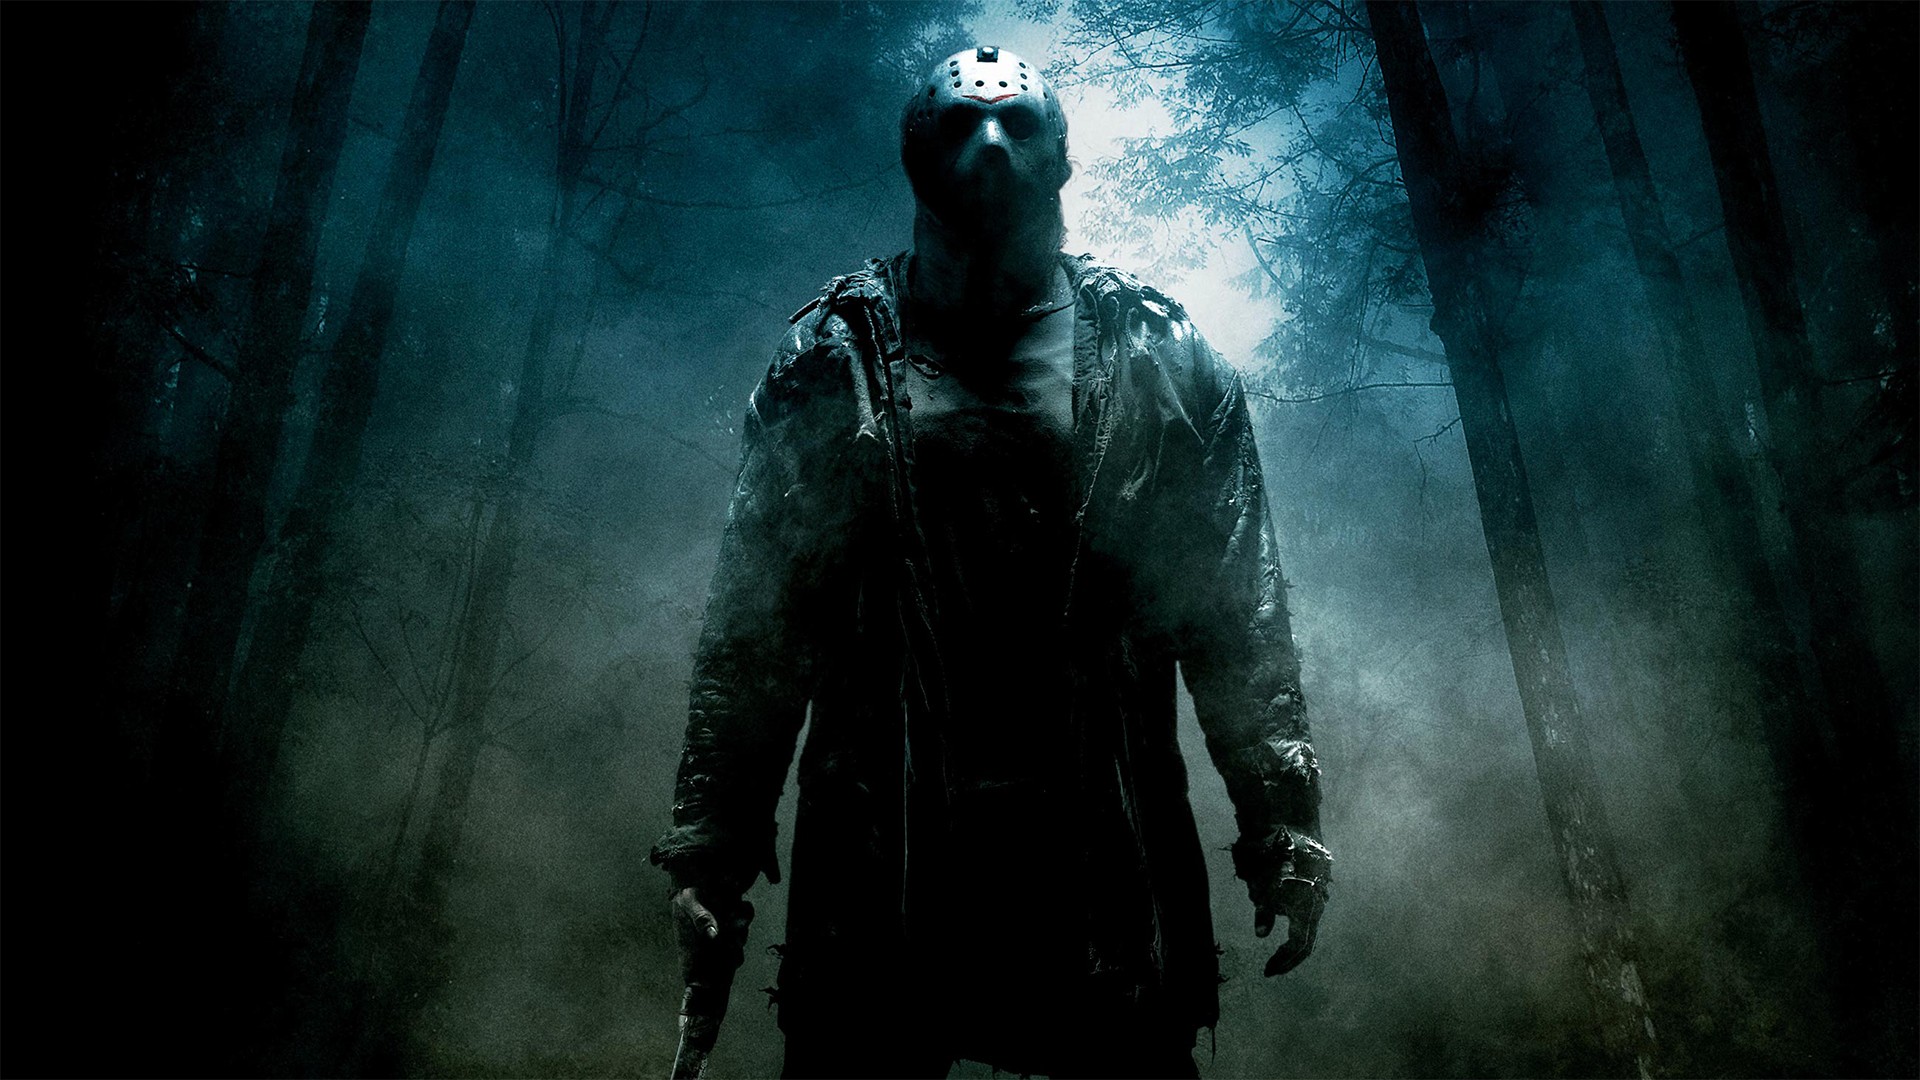 Movie Friday The 13th Wallpaper